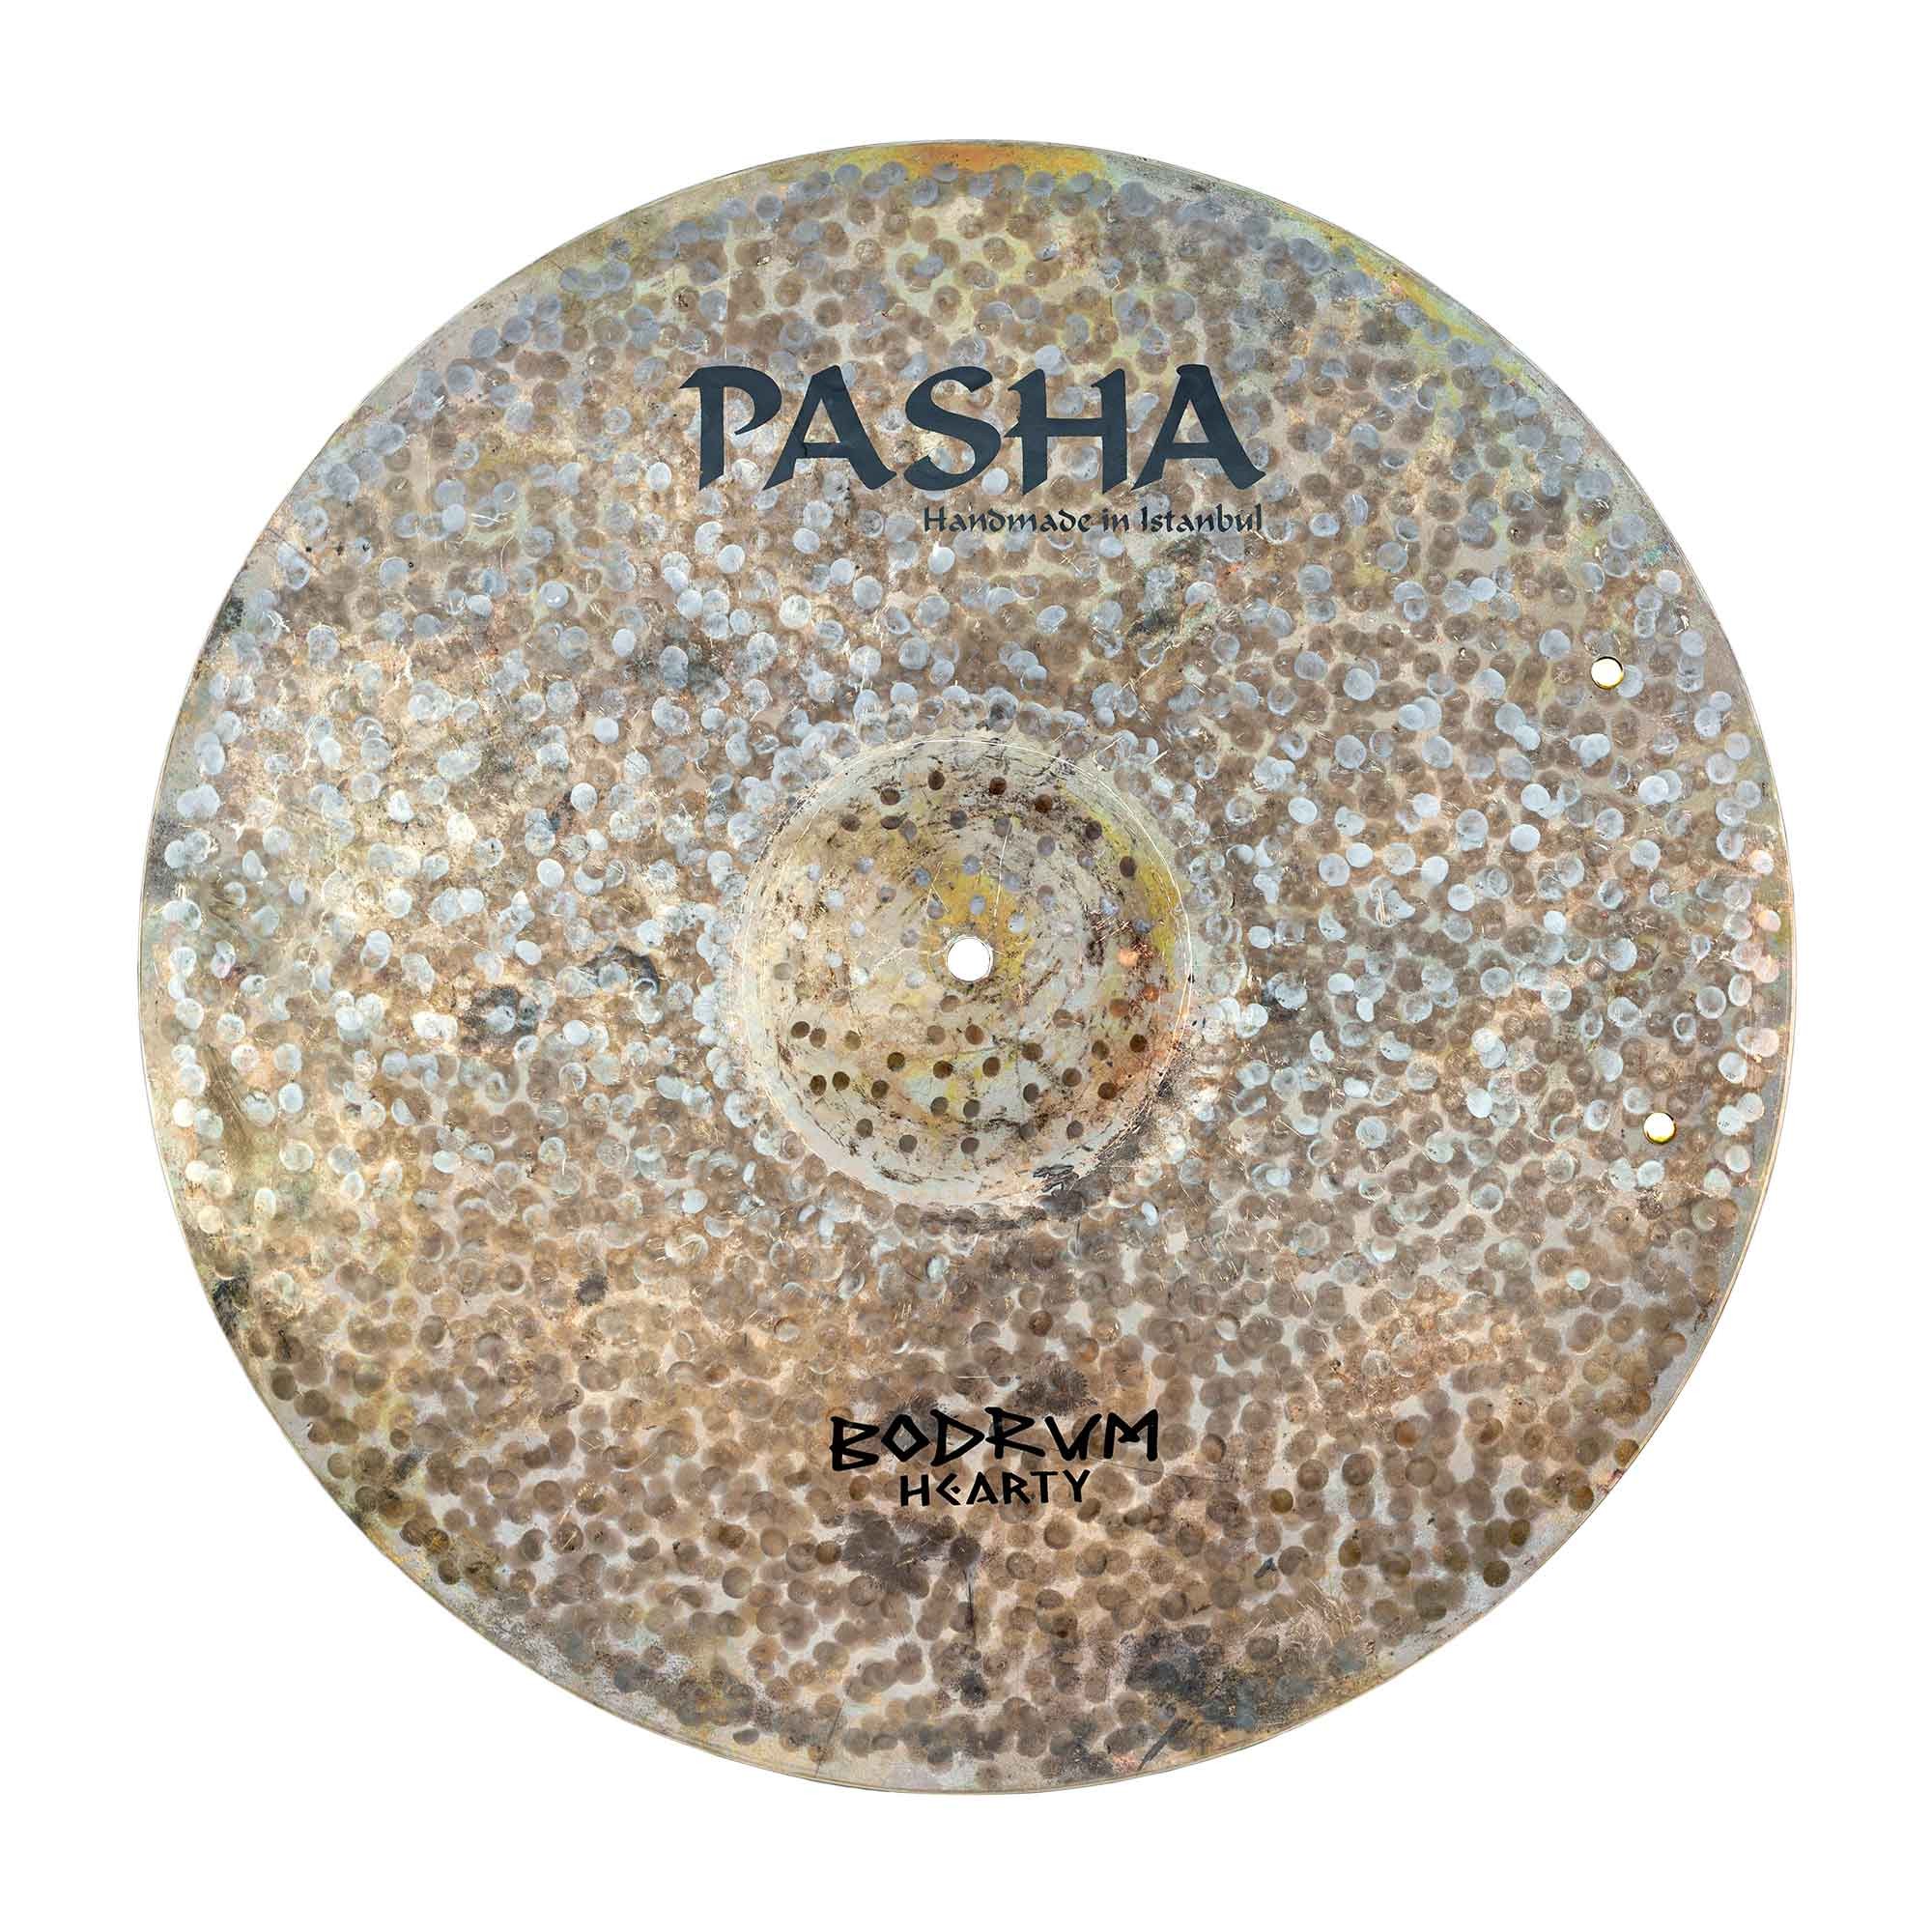 PASHA Signature Ride 21'' with 3 sizzle -outlet